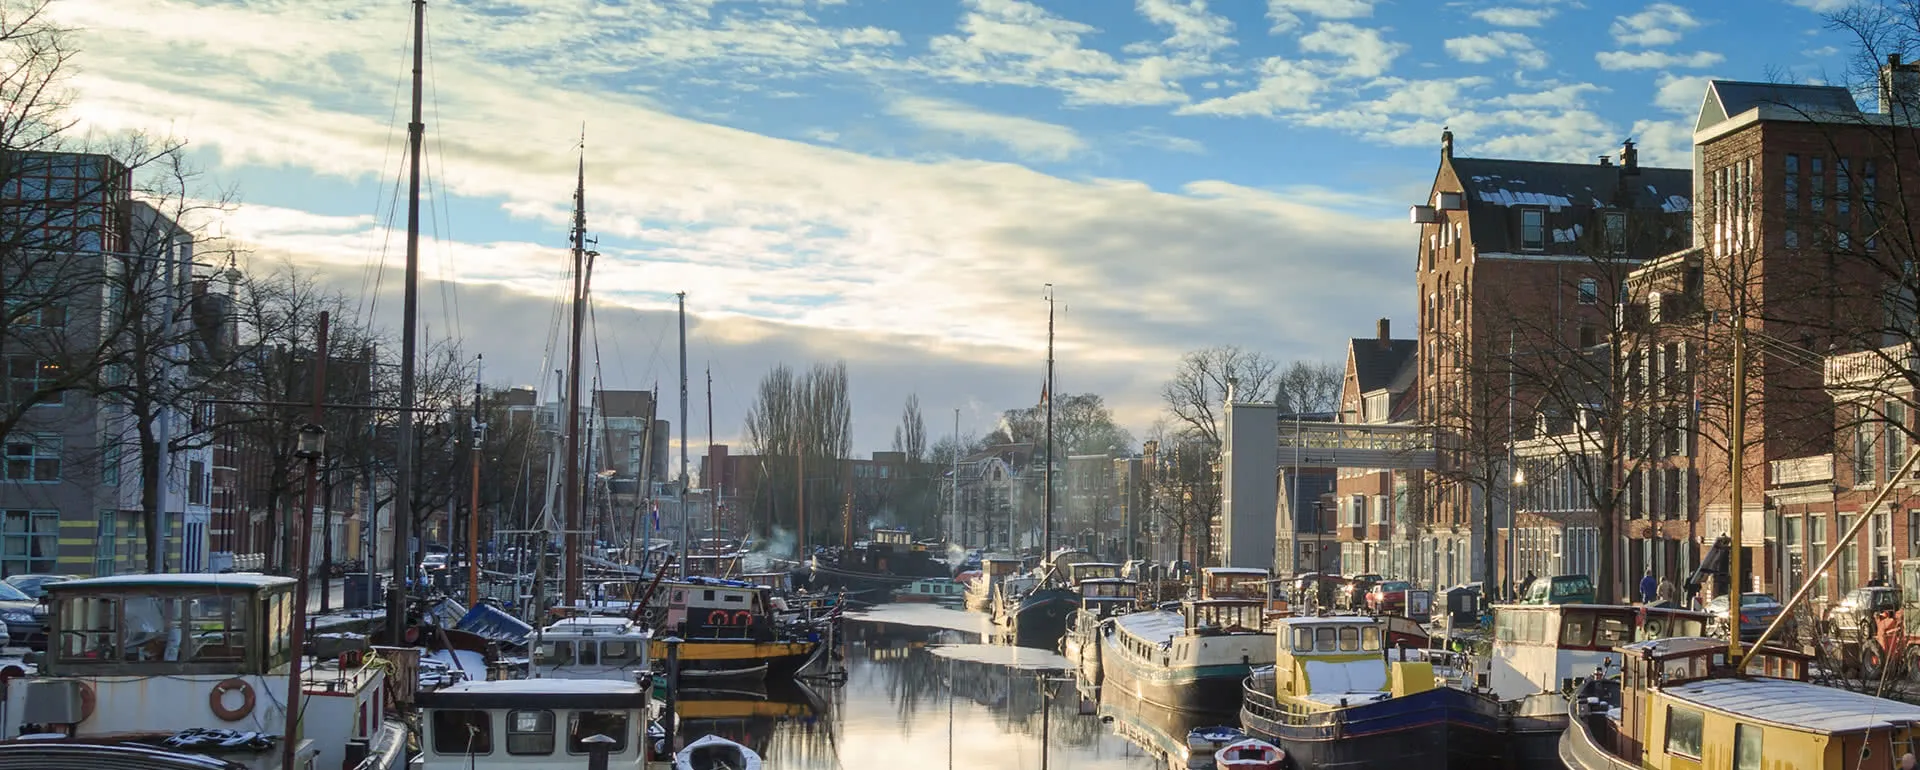 Groningen - the destination with youth hostels